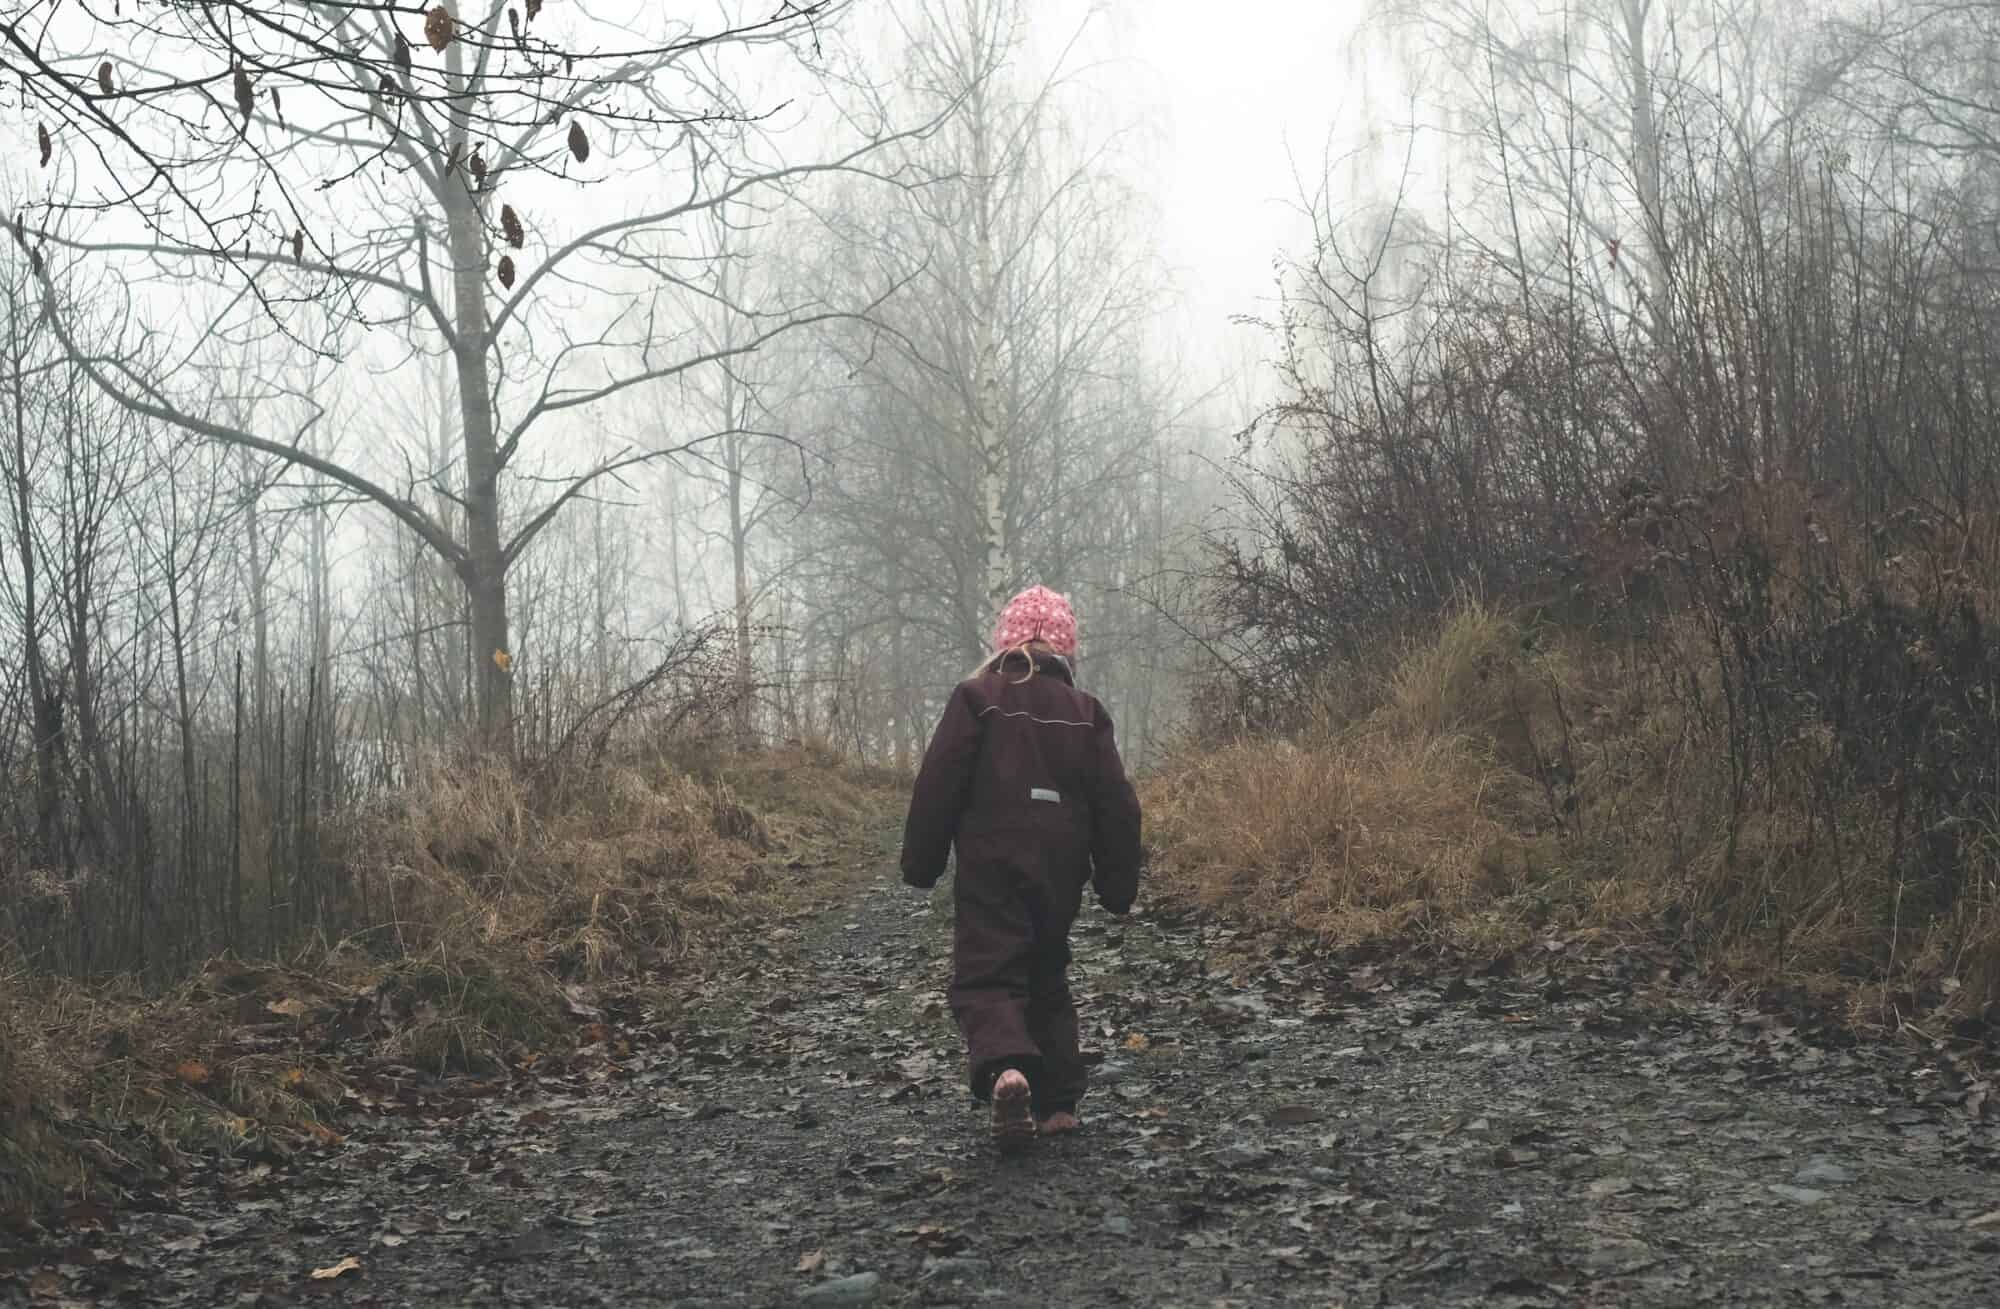 A child in a snow suit walks down a foggy forest trail in the winter.